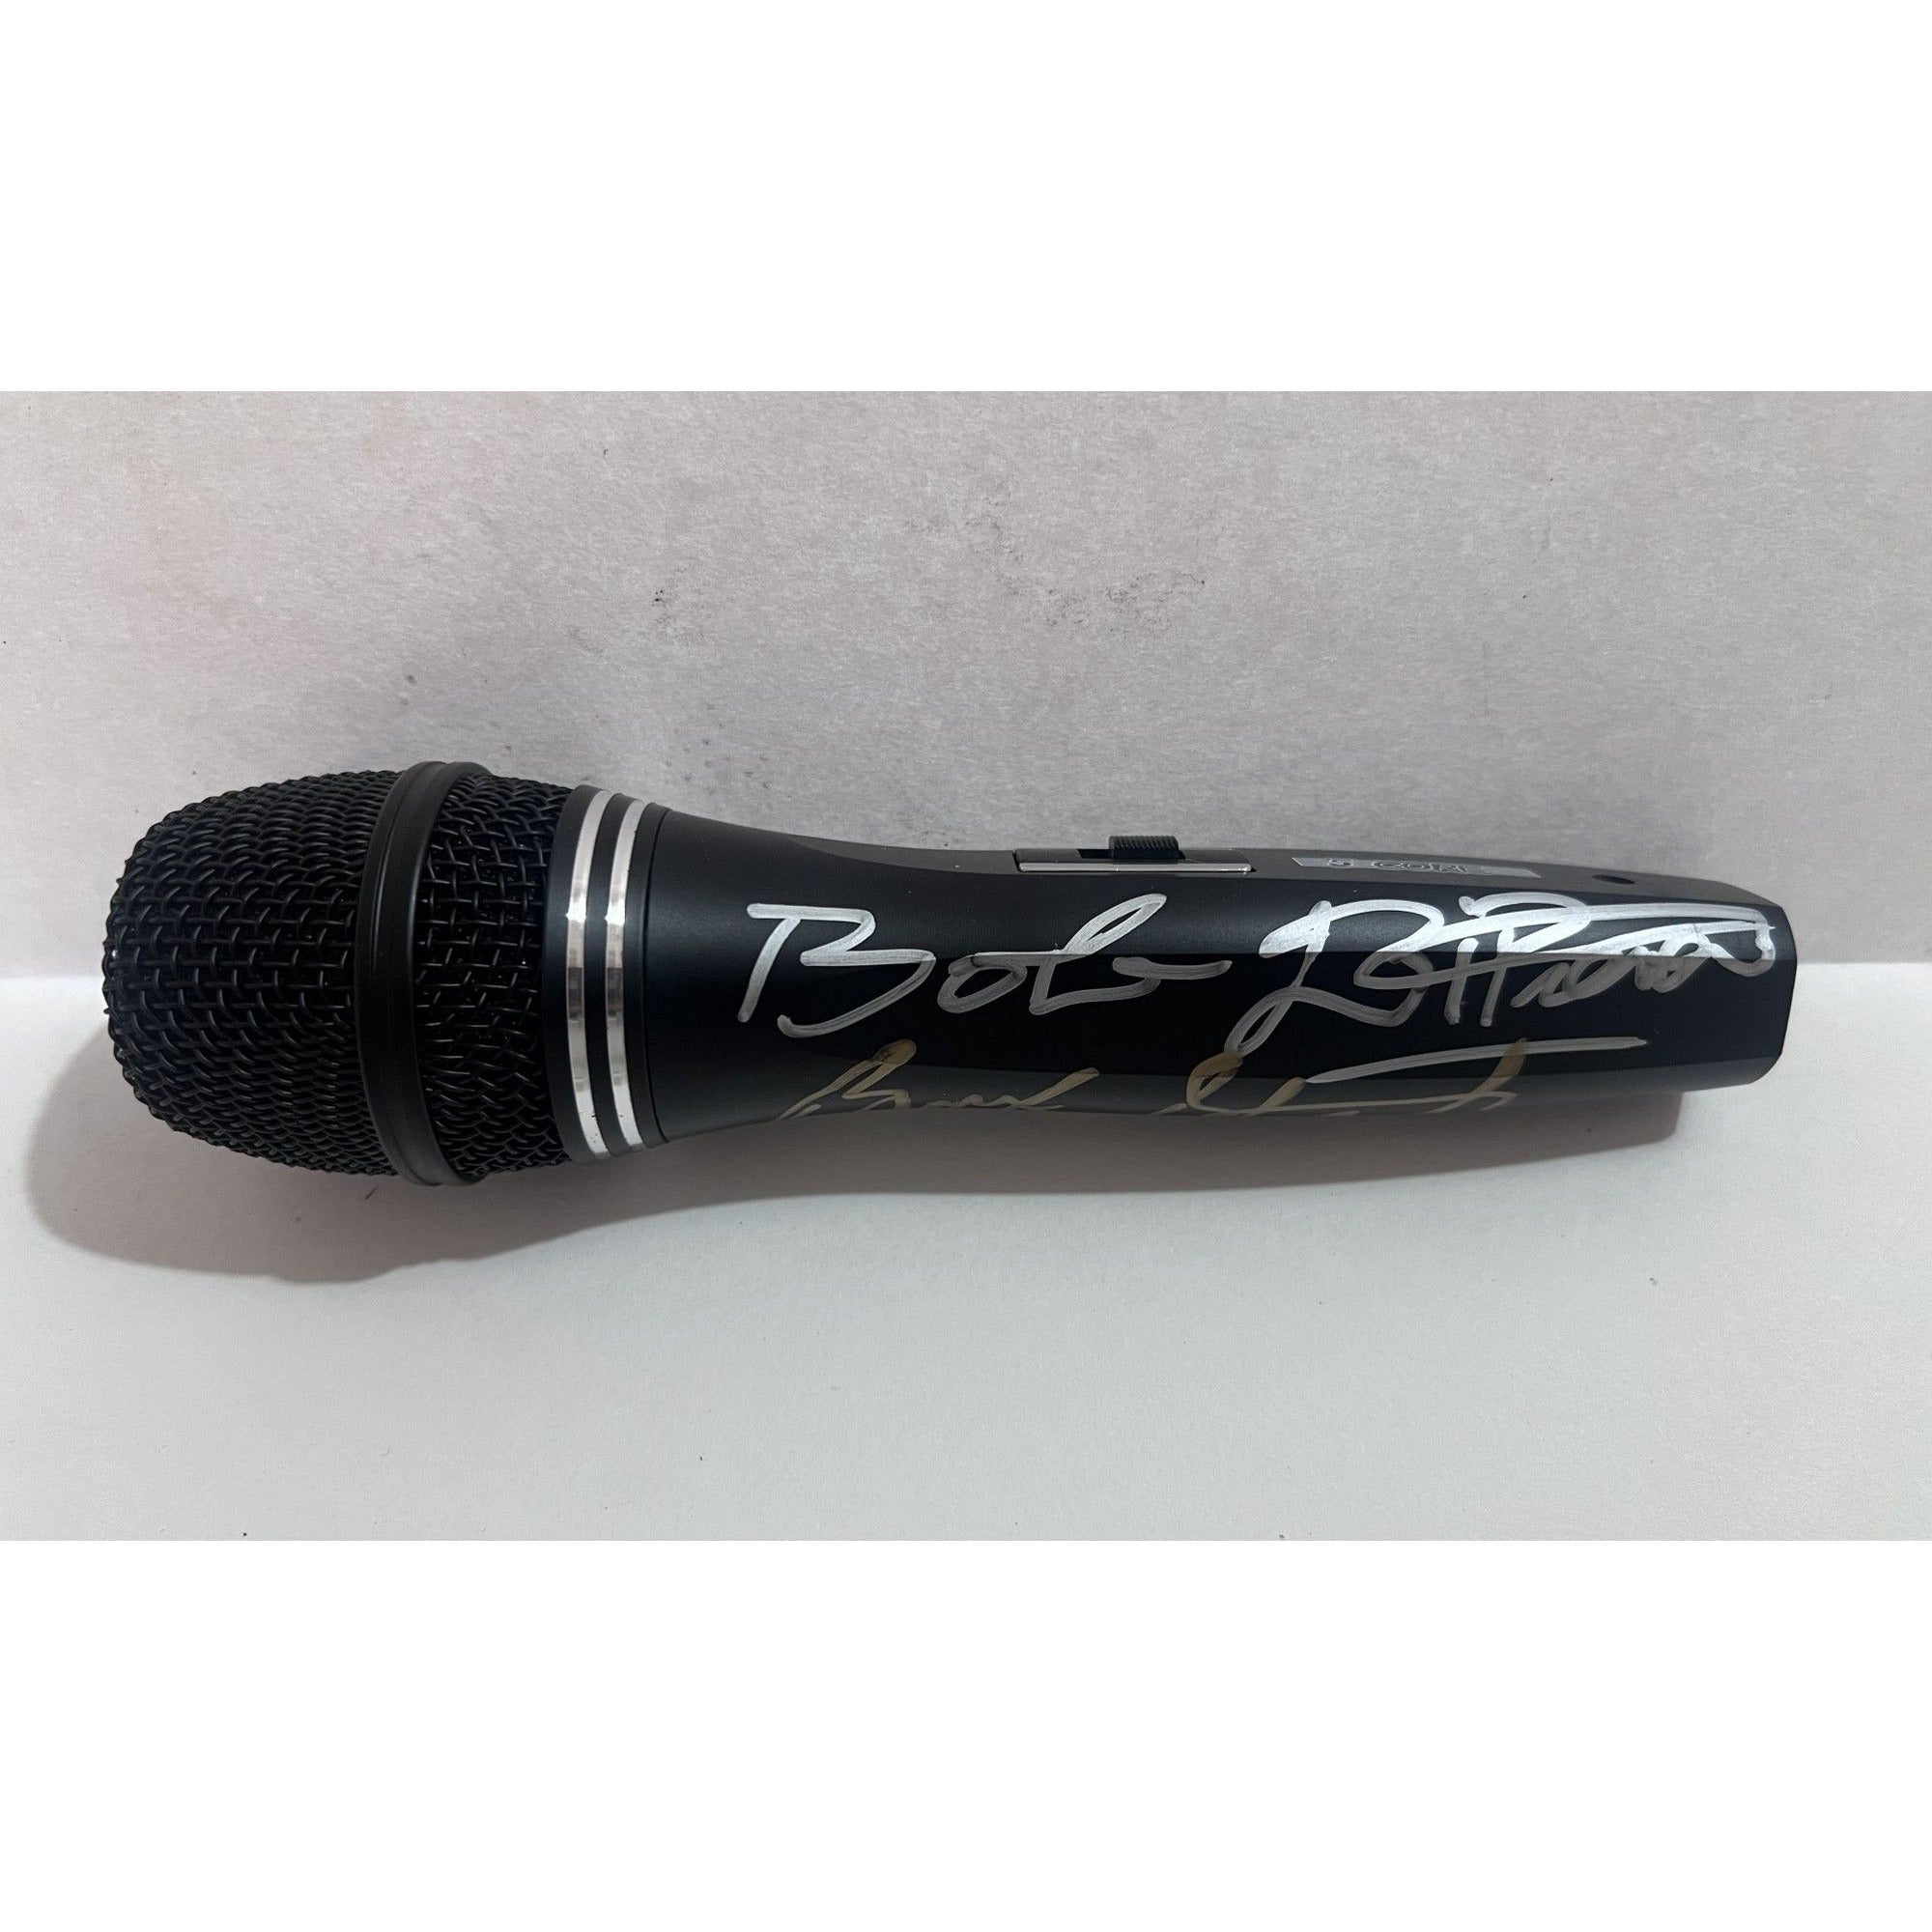 George Strait and songwriter Bob DiPiero microphone signed with proof